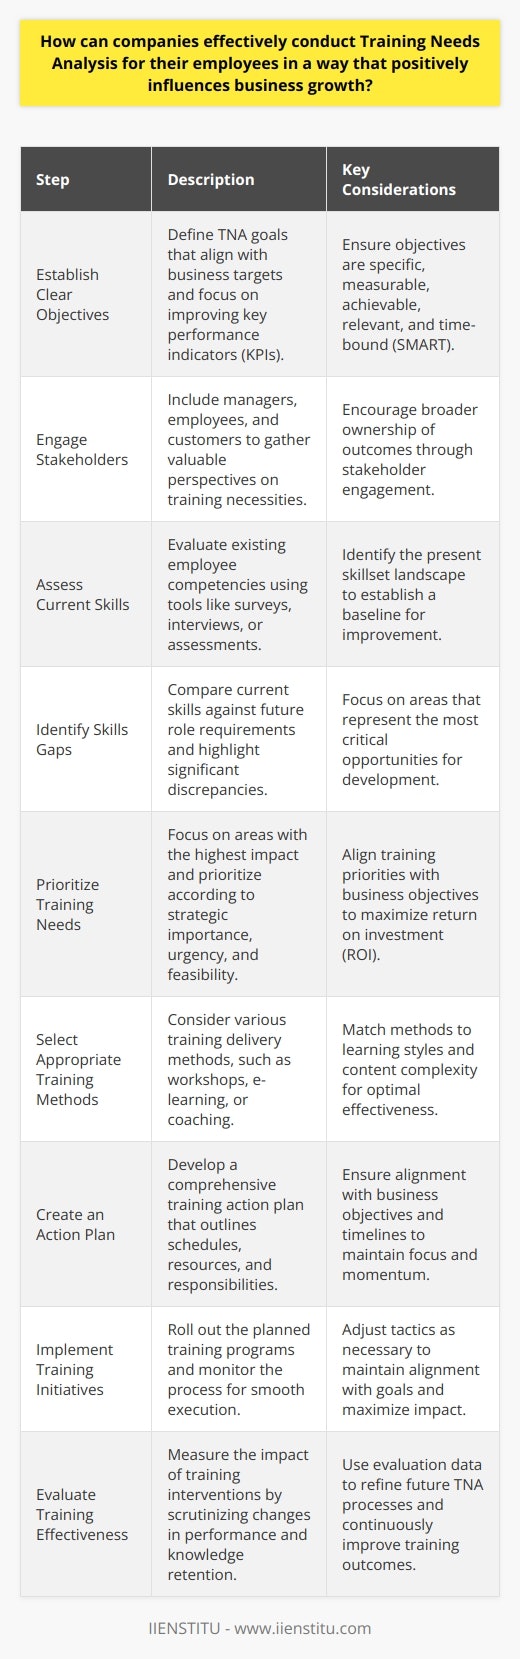 Understanding Training Needs Analysis Training Needs Analysis (TNA) stands crucial for workforce competency. It identifies gaps between current capabilities and required skills. Organizations aim for TNA to enhance employee performance. This directly ties to business growth. Steps for an Effective TNA Establish Clear Objectives Start by defining clear TNA goals. These objectives must align with business targets. They should focus on improving key performance indicators (KPIs). Engage Stakeholders Include managers, employees, and customers alike. Their insights offer valuable perspectives on training necessities. Engagement encourages broader ownership of outcomes. Assess Current Skills Evaluate existing employee competencies. Use tools like surveys, interviews, or assessments. This step is fundamental to identifying the present skillset landscape. Identify Skills Gaps Compare current skills against future role requirements. Highlight where significant discrepancies exist. These gaps represent areas for potential development. Prioritize Training Needs Focus on areas with the highest impact. Prioritize according to strategic importance. Consider also the urgency and feasibility of training interventions. Select Appropriate Training Methods Consider various training delivery methods. These might include workshops, e-learning, or coaching. Match methods to learning styles and content complexity. Create an Action Plan Develop a comprehensive training action plan. This plan should outline schedules, resources, and responsibilities. Ensure alignment with business objectives and timelines. Implement Training Initiatives Roll out the planned training programs. Monitor the process for smooth execution. Adjust tactics as necessary to maintain alignment with goals. Evaluate Training Effectiveness Measure the impact of training interventions. Scrutinize changes in performance and knowledge retention. Use this data to refine future TNA processes. The Impact on Business Growth Effective TNA can transform an organization. It targets employee development initiatives. It sharpens skills and competencies that drive business forward. Well-trained employees often show increased productivity and innovation. Measuring Success Align Training with Business Goals Ensure that training efforts reflect strategic objectives. This enhances the contribution to business growth. Use KPIs to Measure Impact Select KPIs that reflect training outcomes. Measure these against pre-established benchmarks. Positive shifts in KPIs often indicate successful training initiatives. Gather Feedback and Iterate Collect feedback from all training participants. Use these insights to improve future TNA efforts. Continuous improvement in TNA processes can create a stronger, more adaptable workforce. Key Takeaways - Conduct TNA with clear, business-aligned objectives. - Involve stakeholders for comprehensive needs identification. - Prioritize training areas for maximum impact. - Evaluate training outcomes to ensure business growth. By adhering to these guidelines, companies can conduct TNAs that not only enhance their employees skills but also drive their business growth in a measurable and sustainable manner.